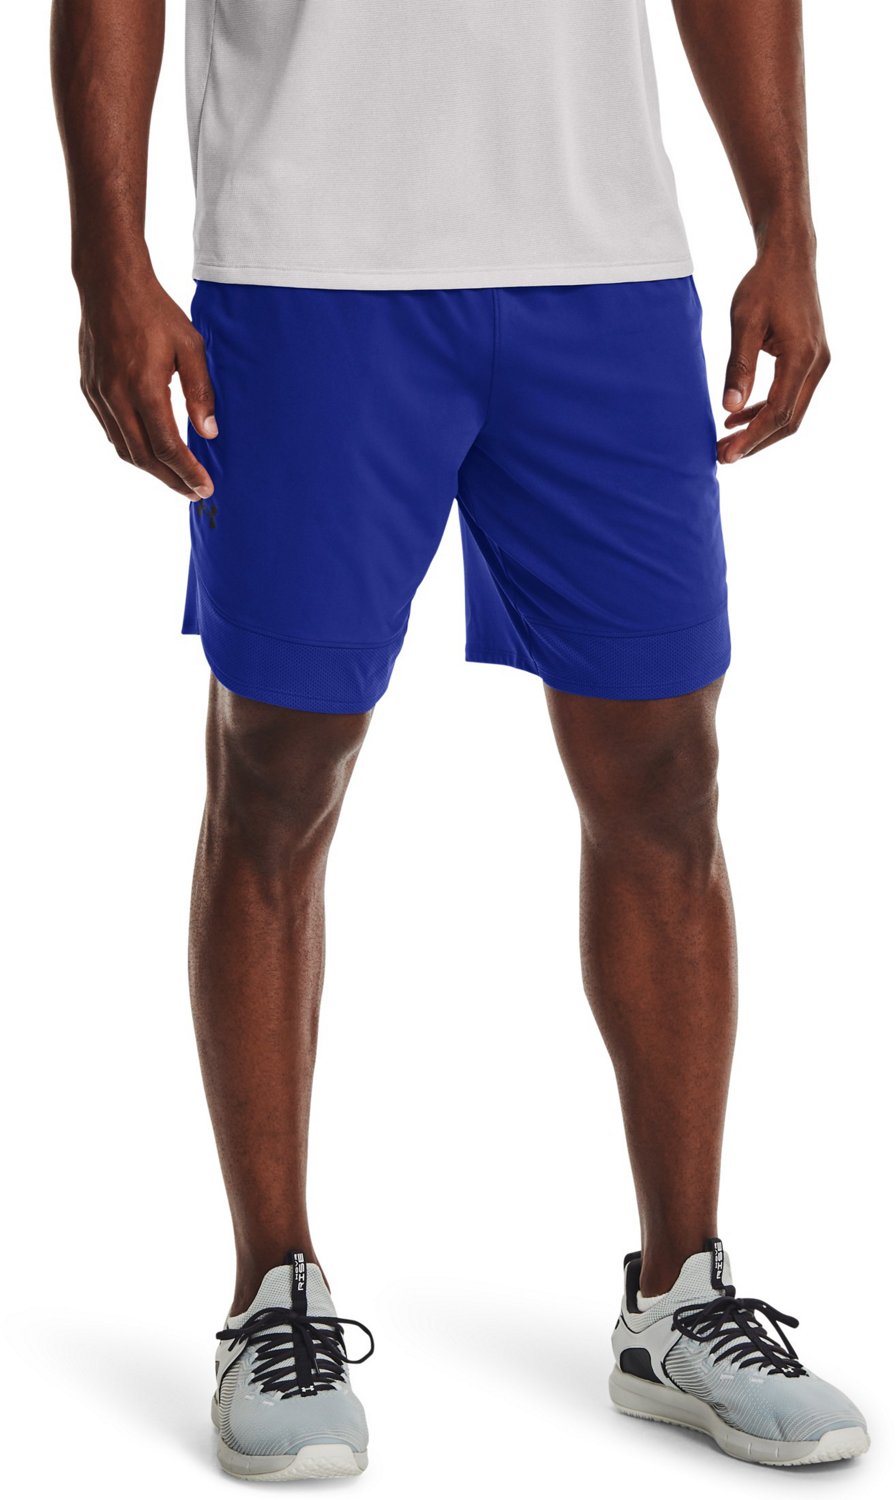 Under Armour Men's Stretch Training Shorts 9 in | Academy